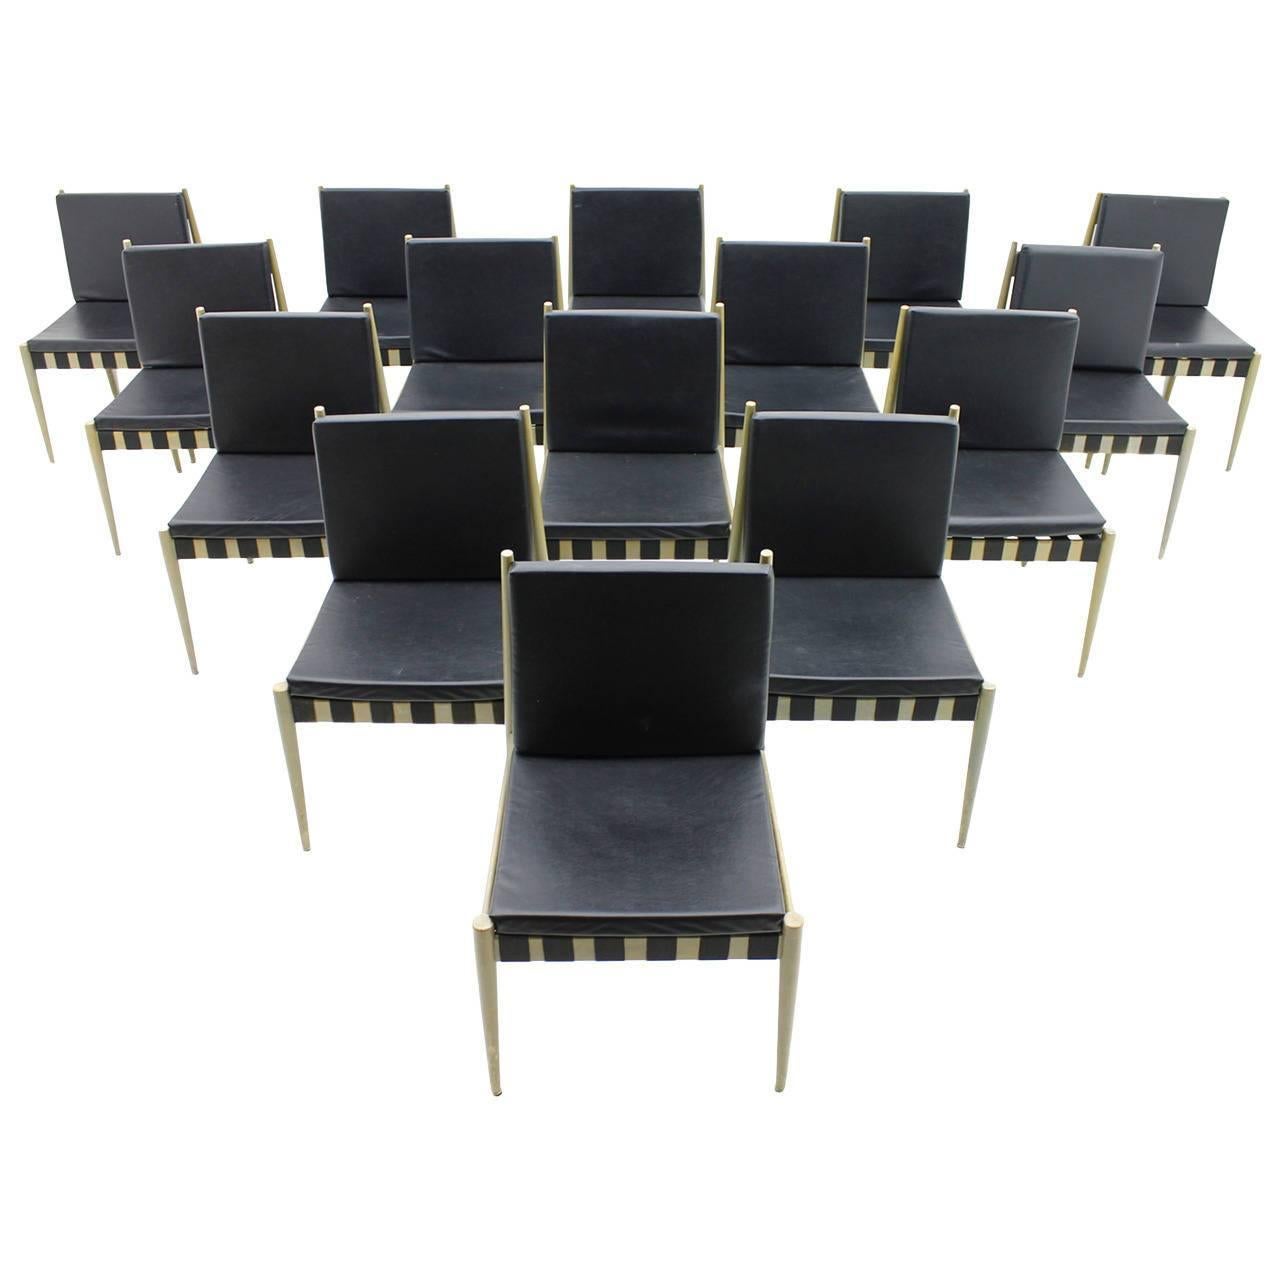 A large set of 60 dining room chairs SE 121 by architect Egon Eiermann, 1964. This chairs are in a rare grey color and black Leatherette cushions. The chairs are from 1965. 

Good original condition.

Worldwide shipping.